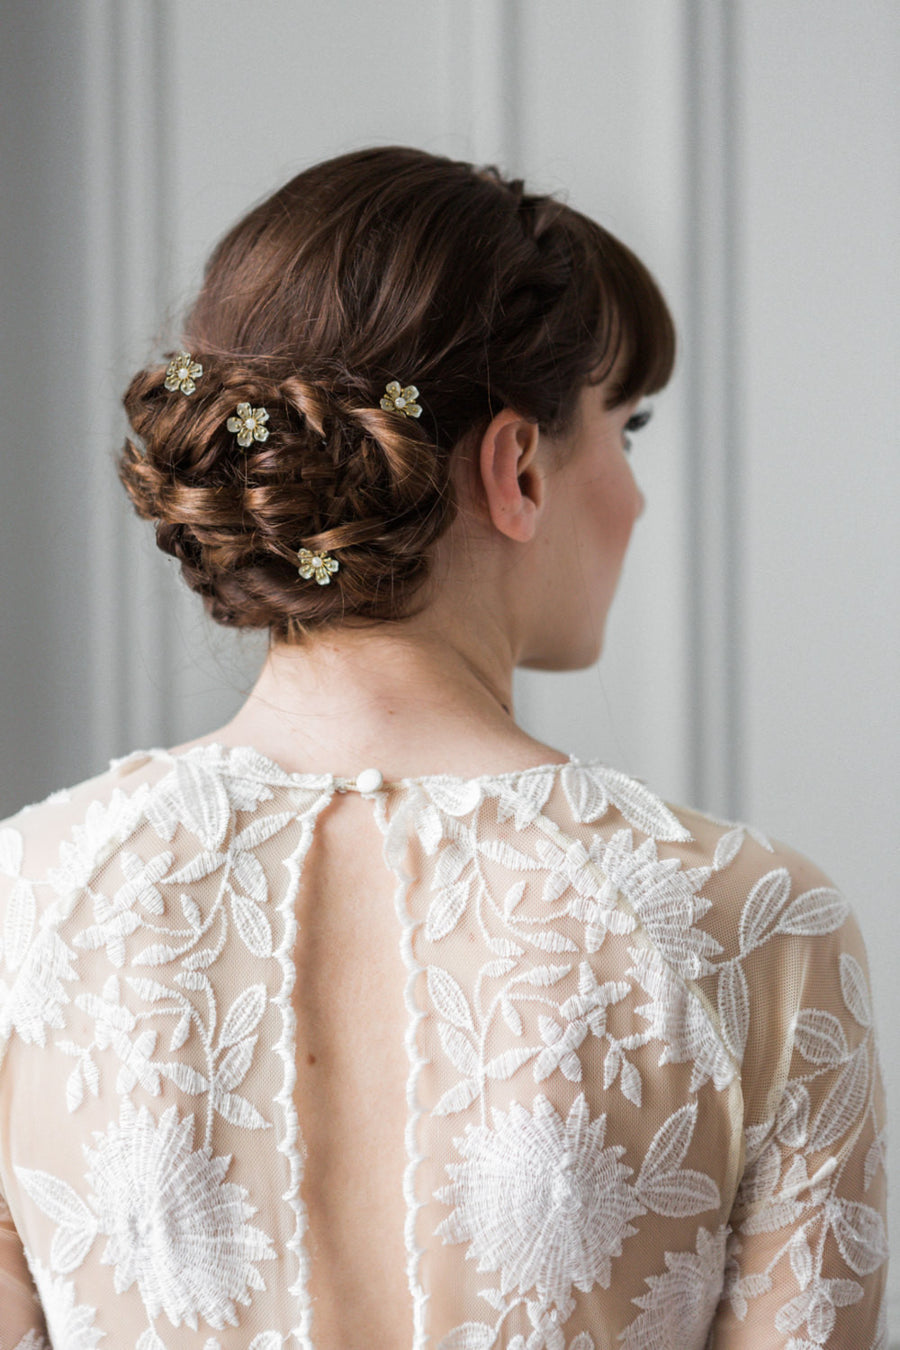 Model with hair pins in her bun wearing a wedding dress